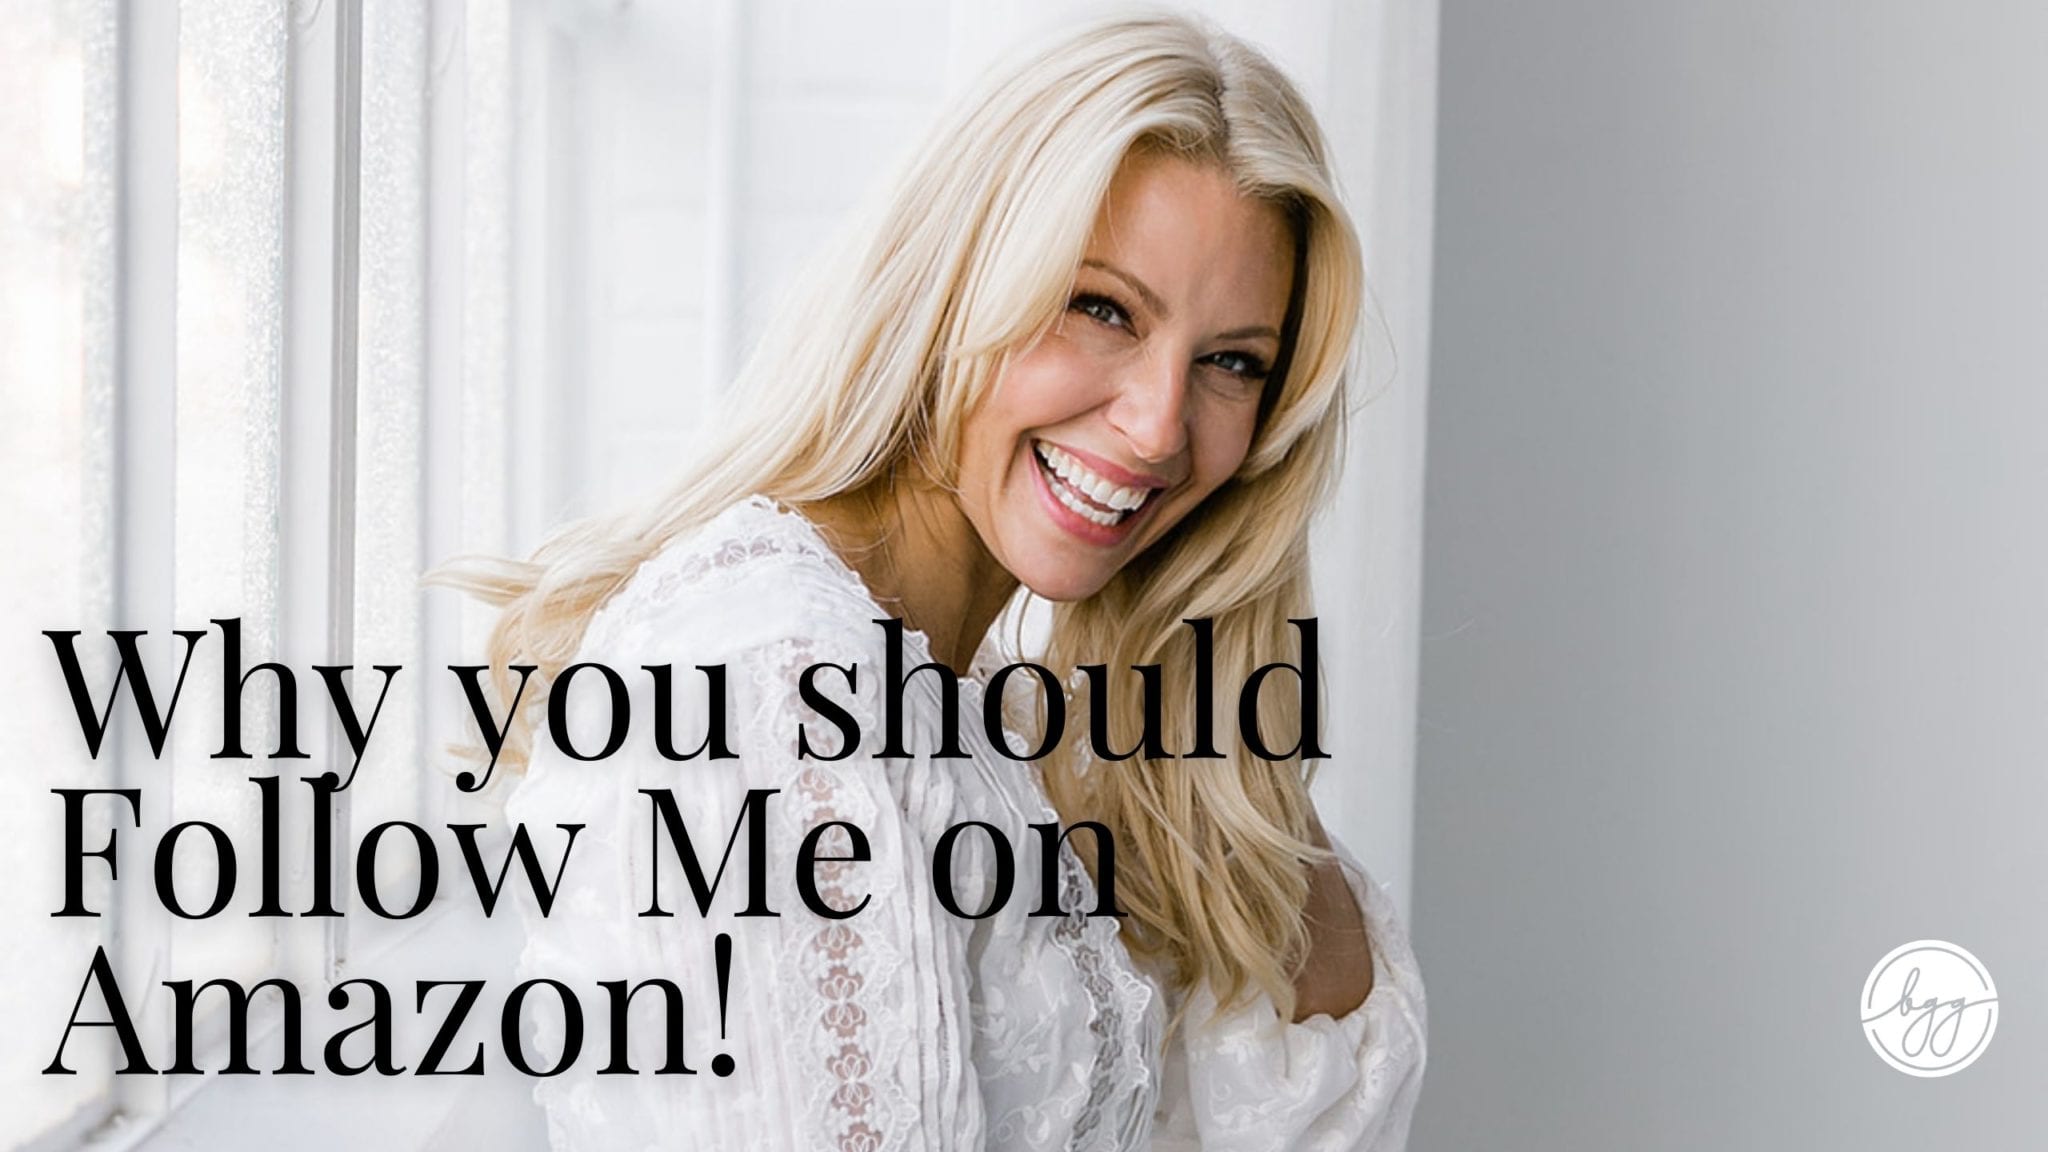 Kelly Page, lifestyle influencer BlueGrayGal, is an A-List Amazon Live streamer. This is a video about why you should follow her her Amazon affiliate program page!